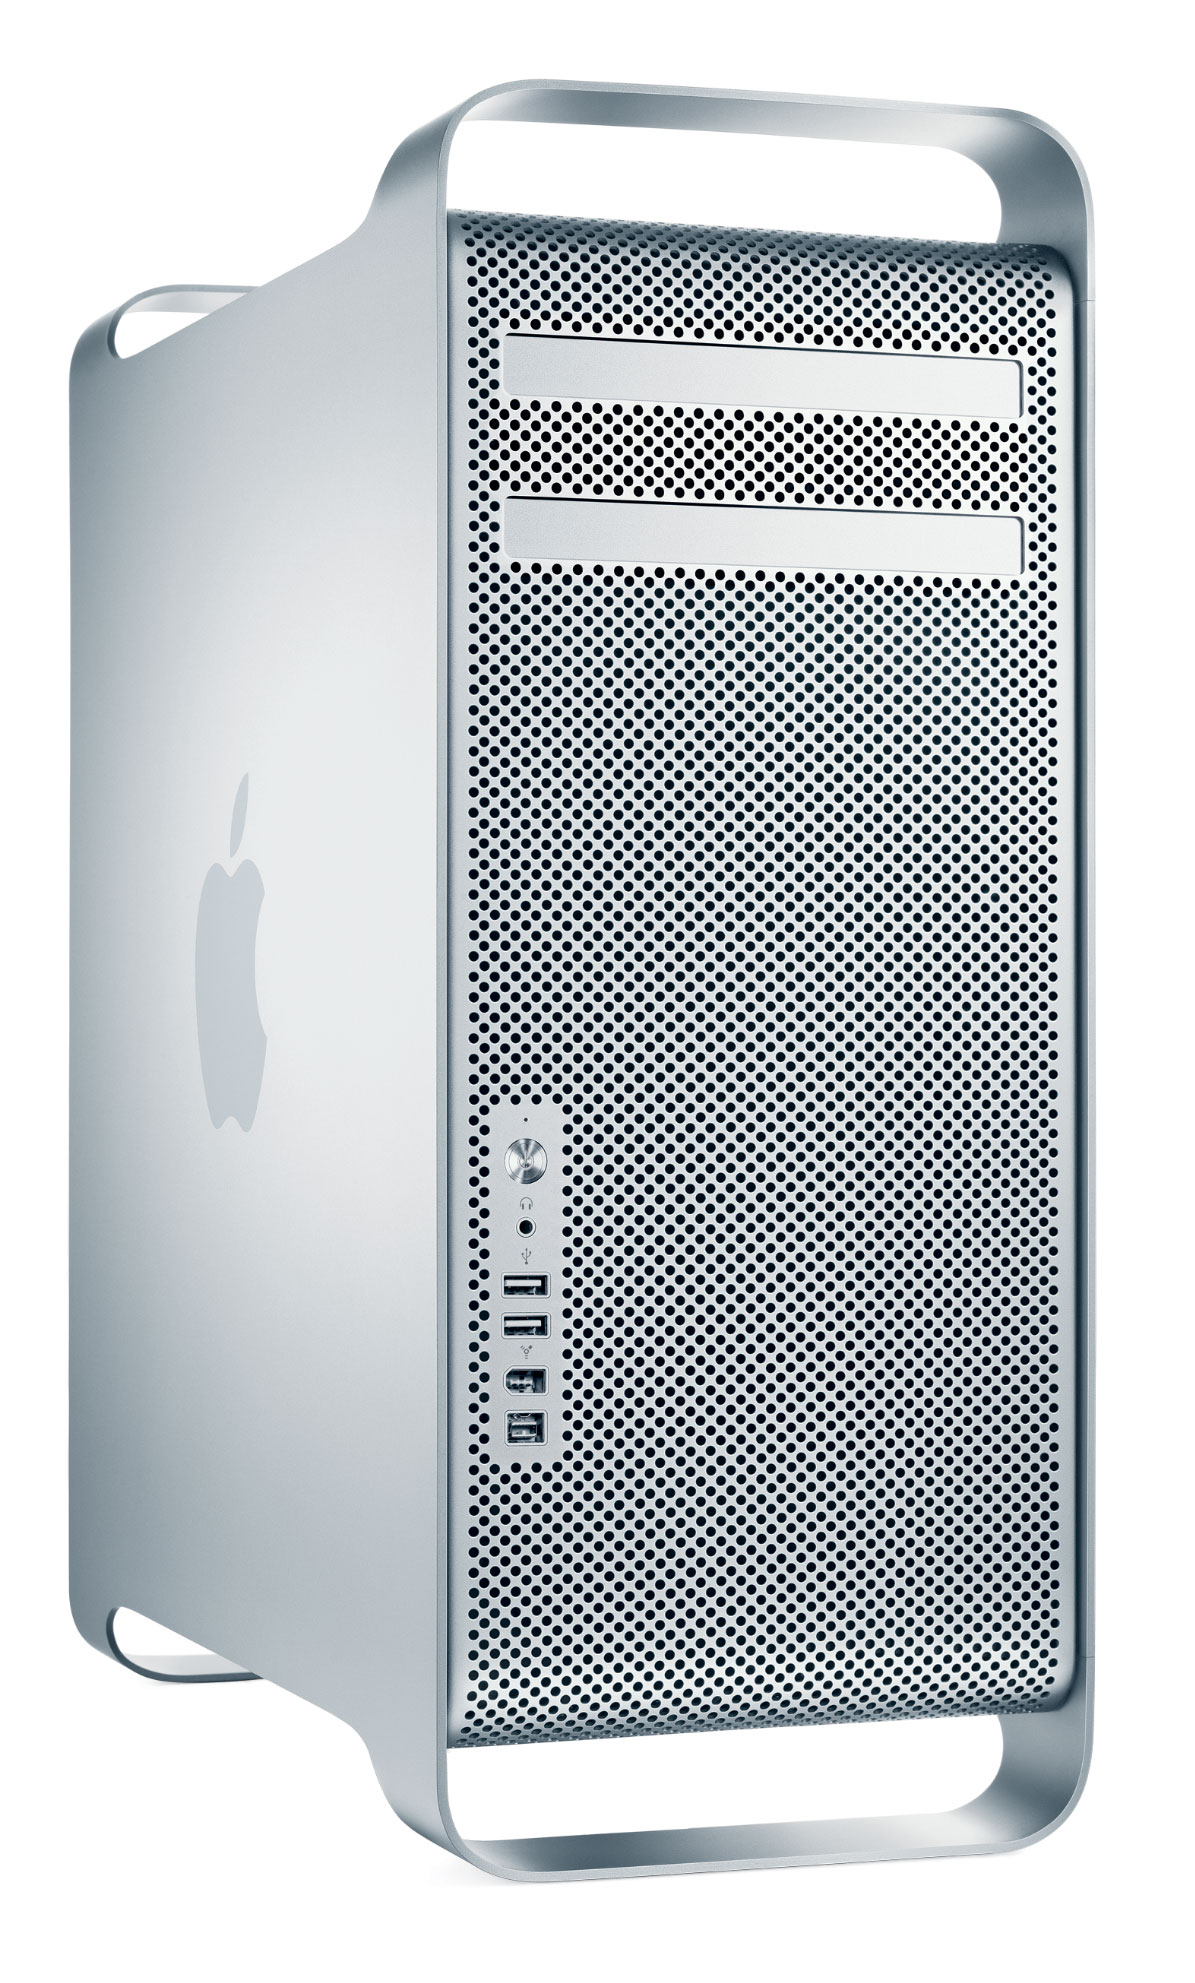 Mac Pro Cases and Parts - 2013